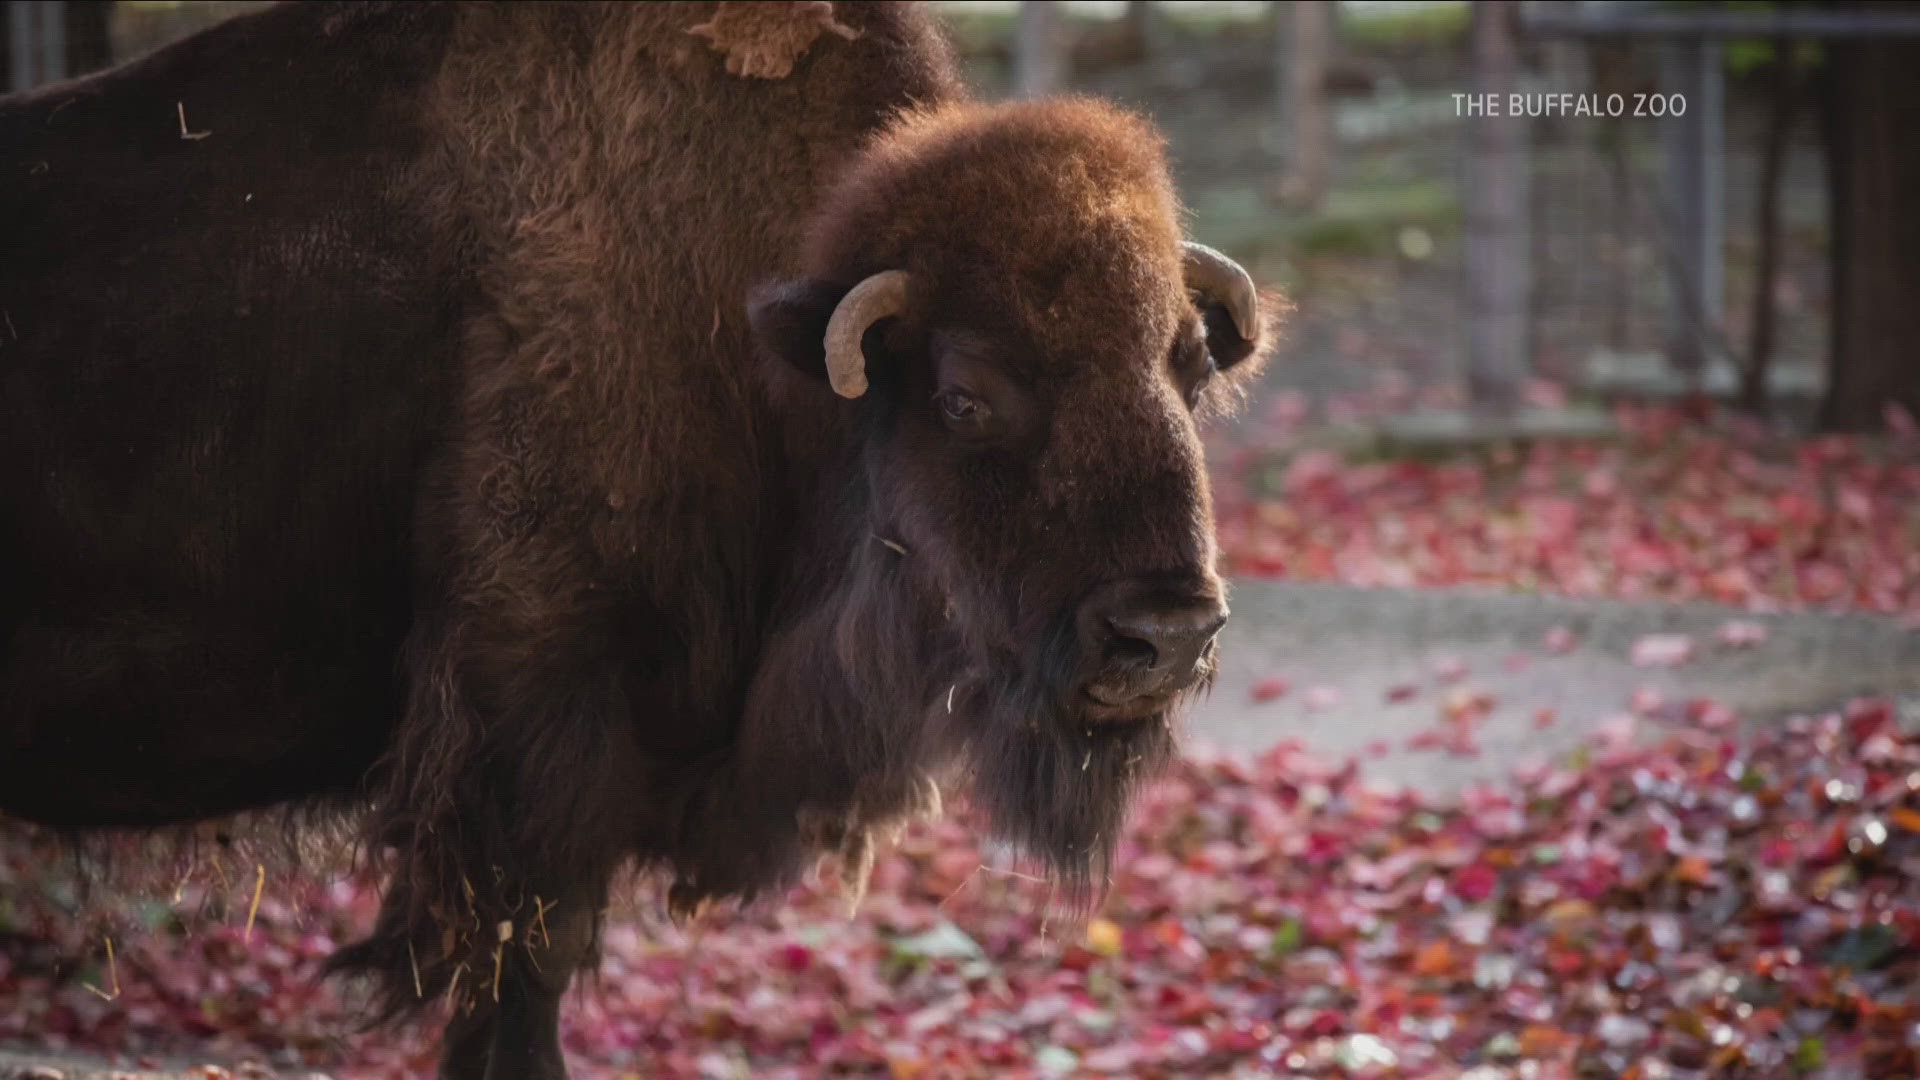 Wilma the Bison passes away at 29 years old